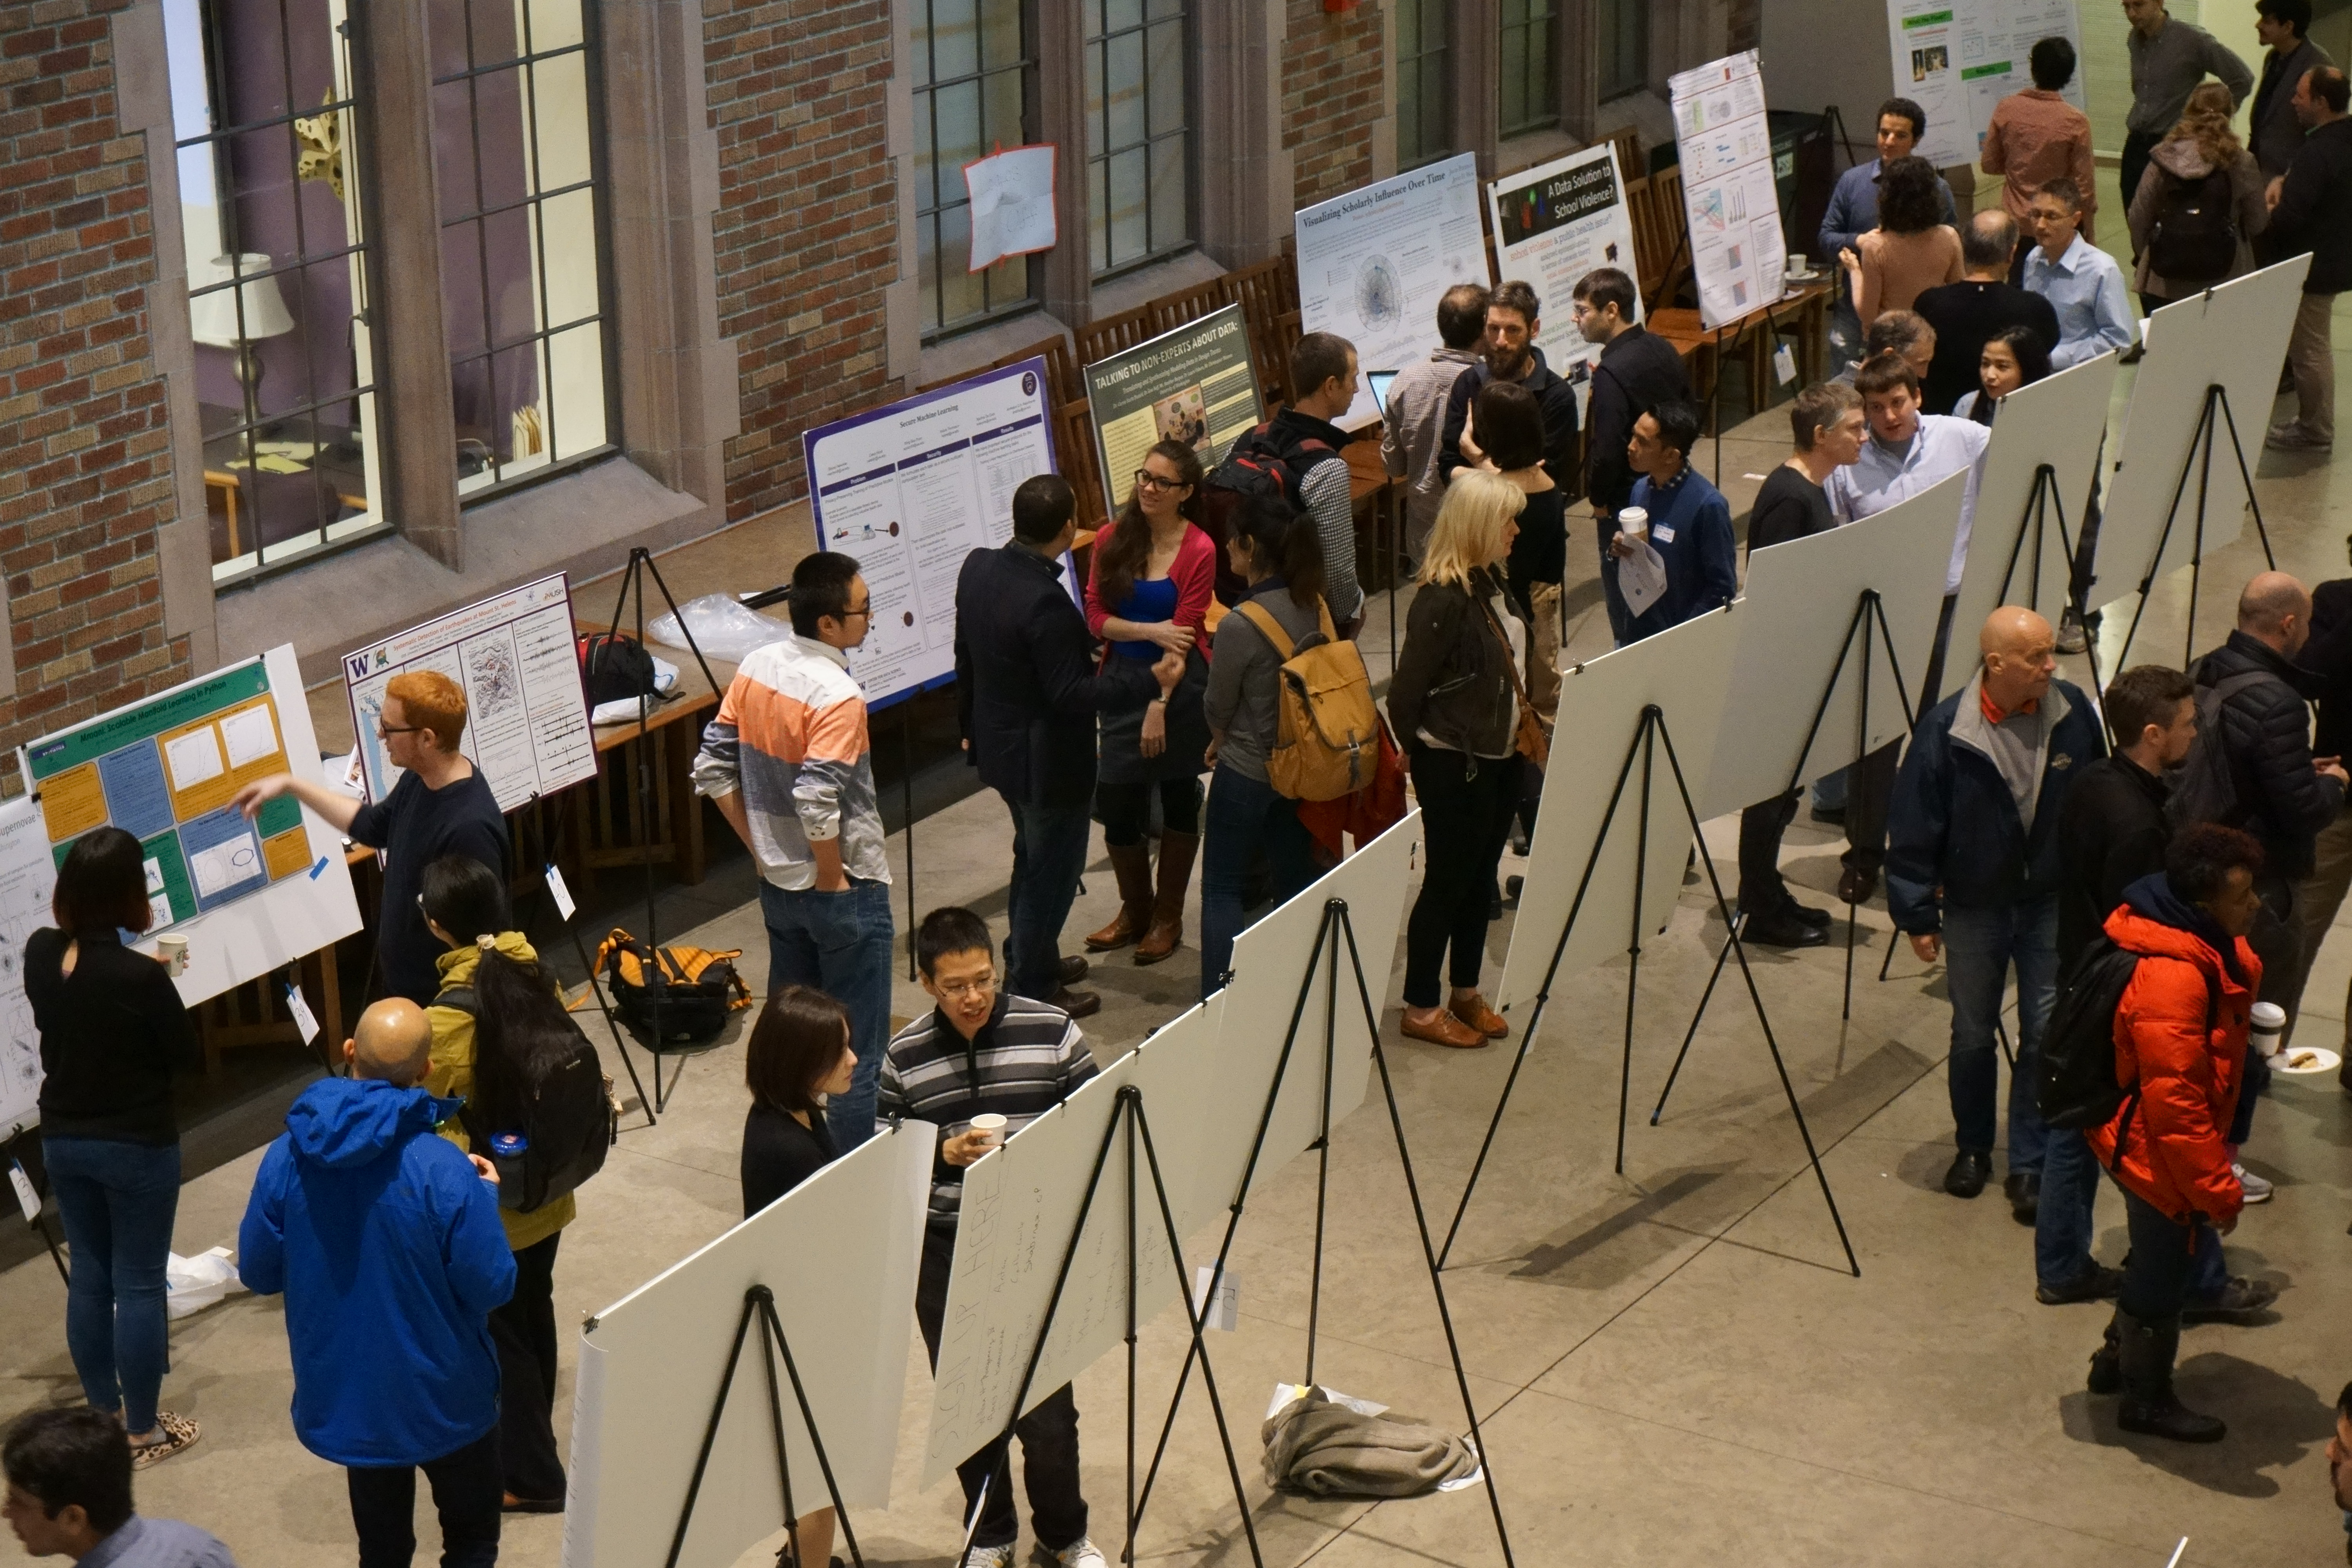 eScience Institute - Data Science Poster Session Draws Crowds